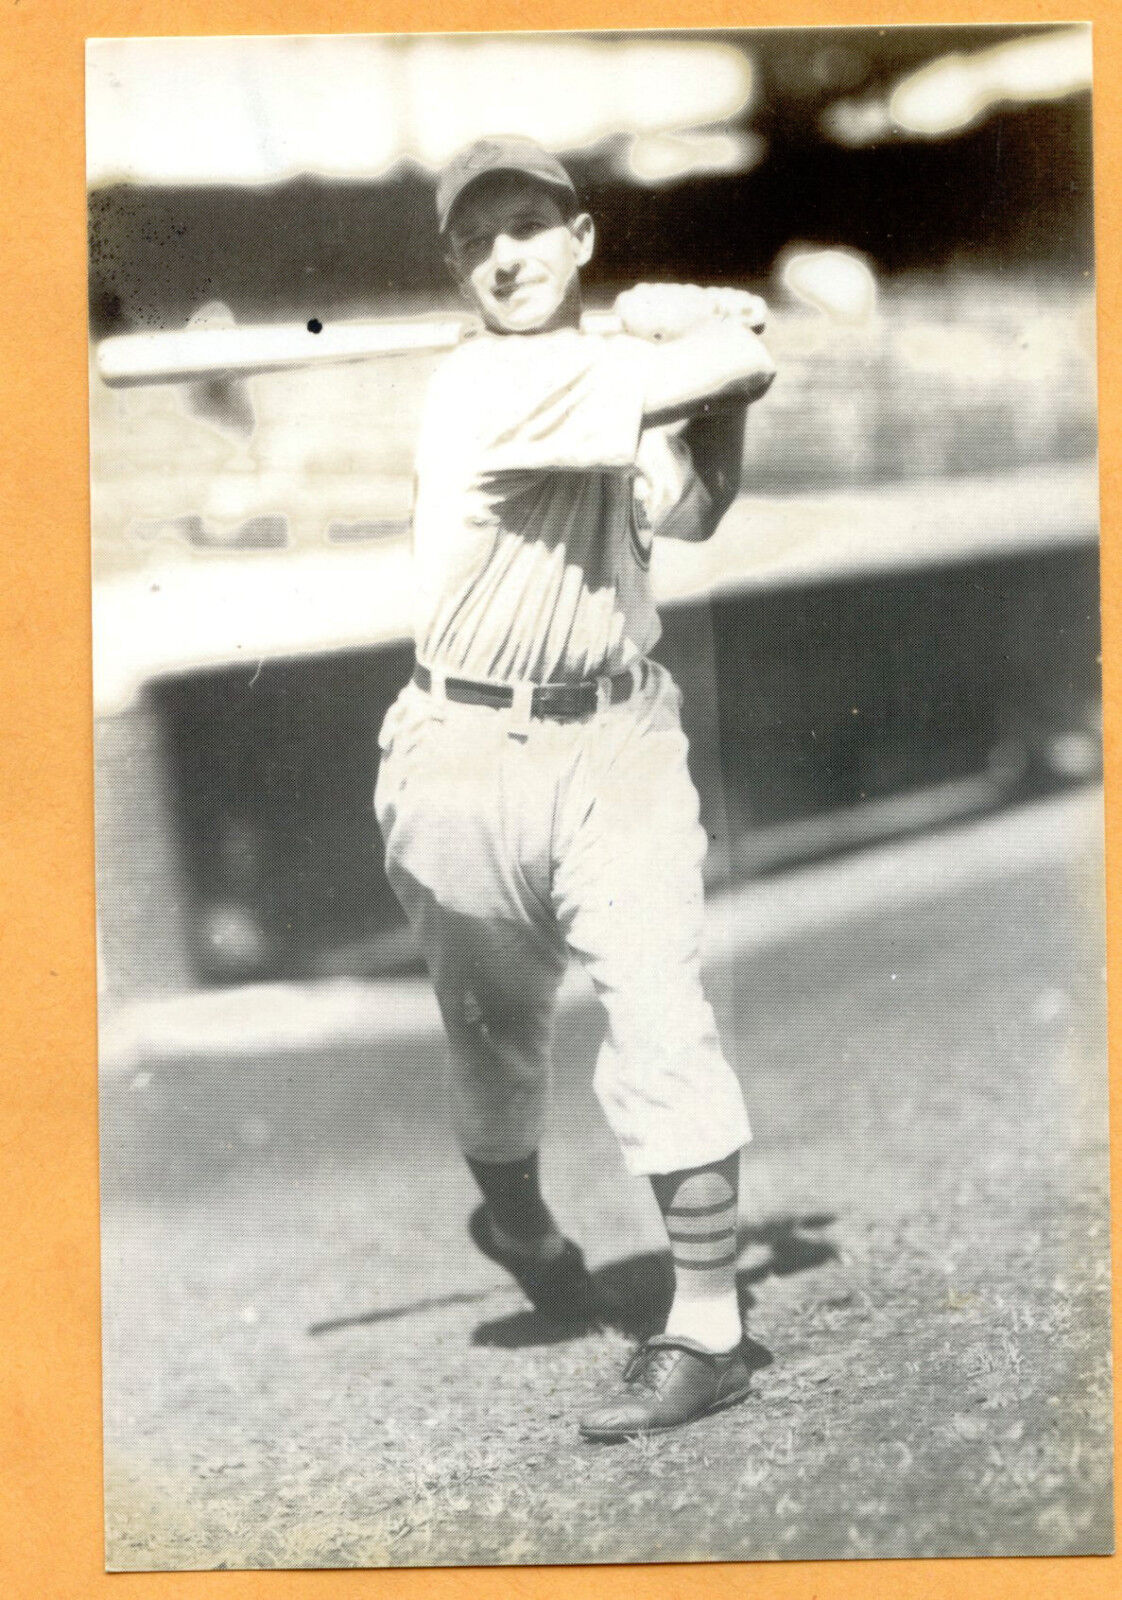 Old Baseball Photo of Andy Pafko